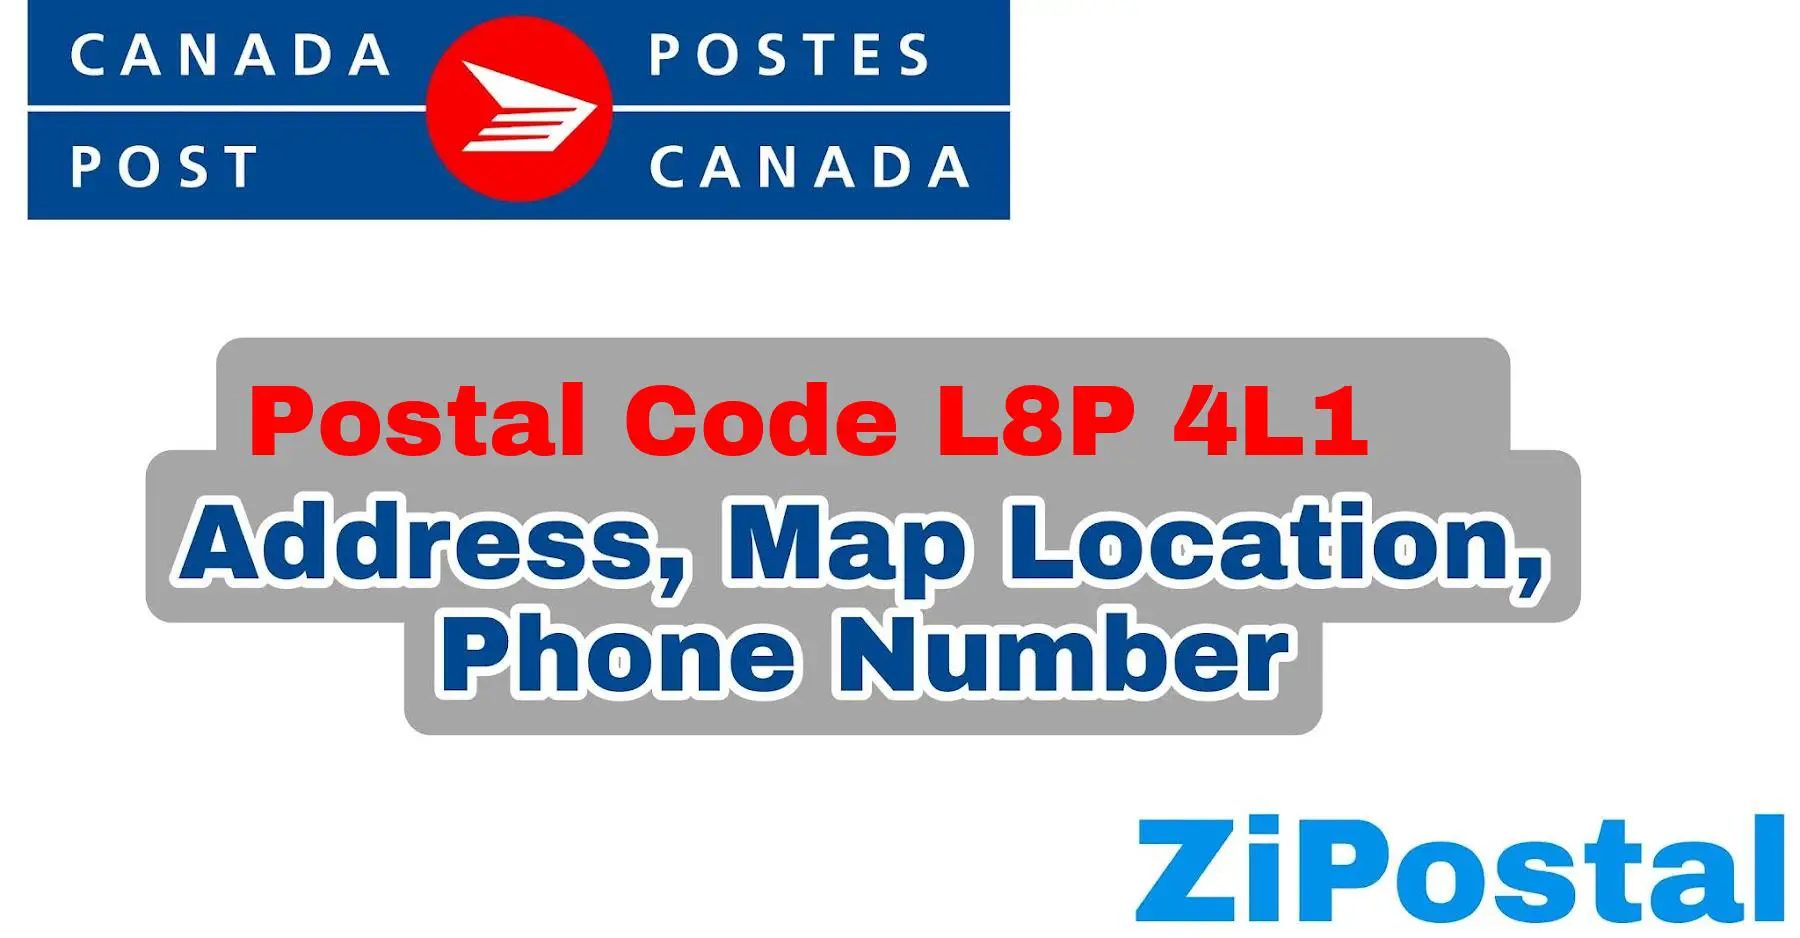 Postal Code L8P 4L1 Address Map Location and Phone Number